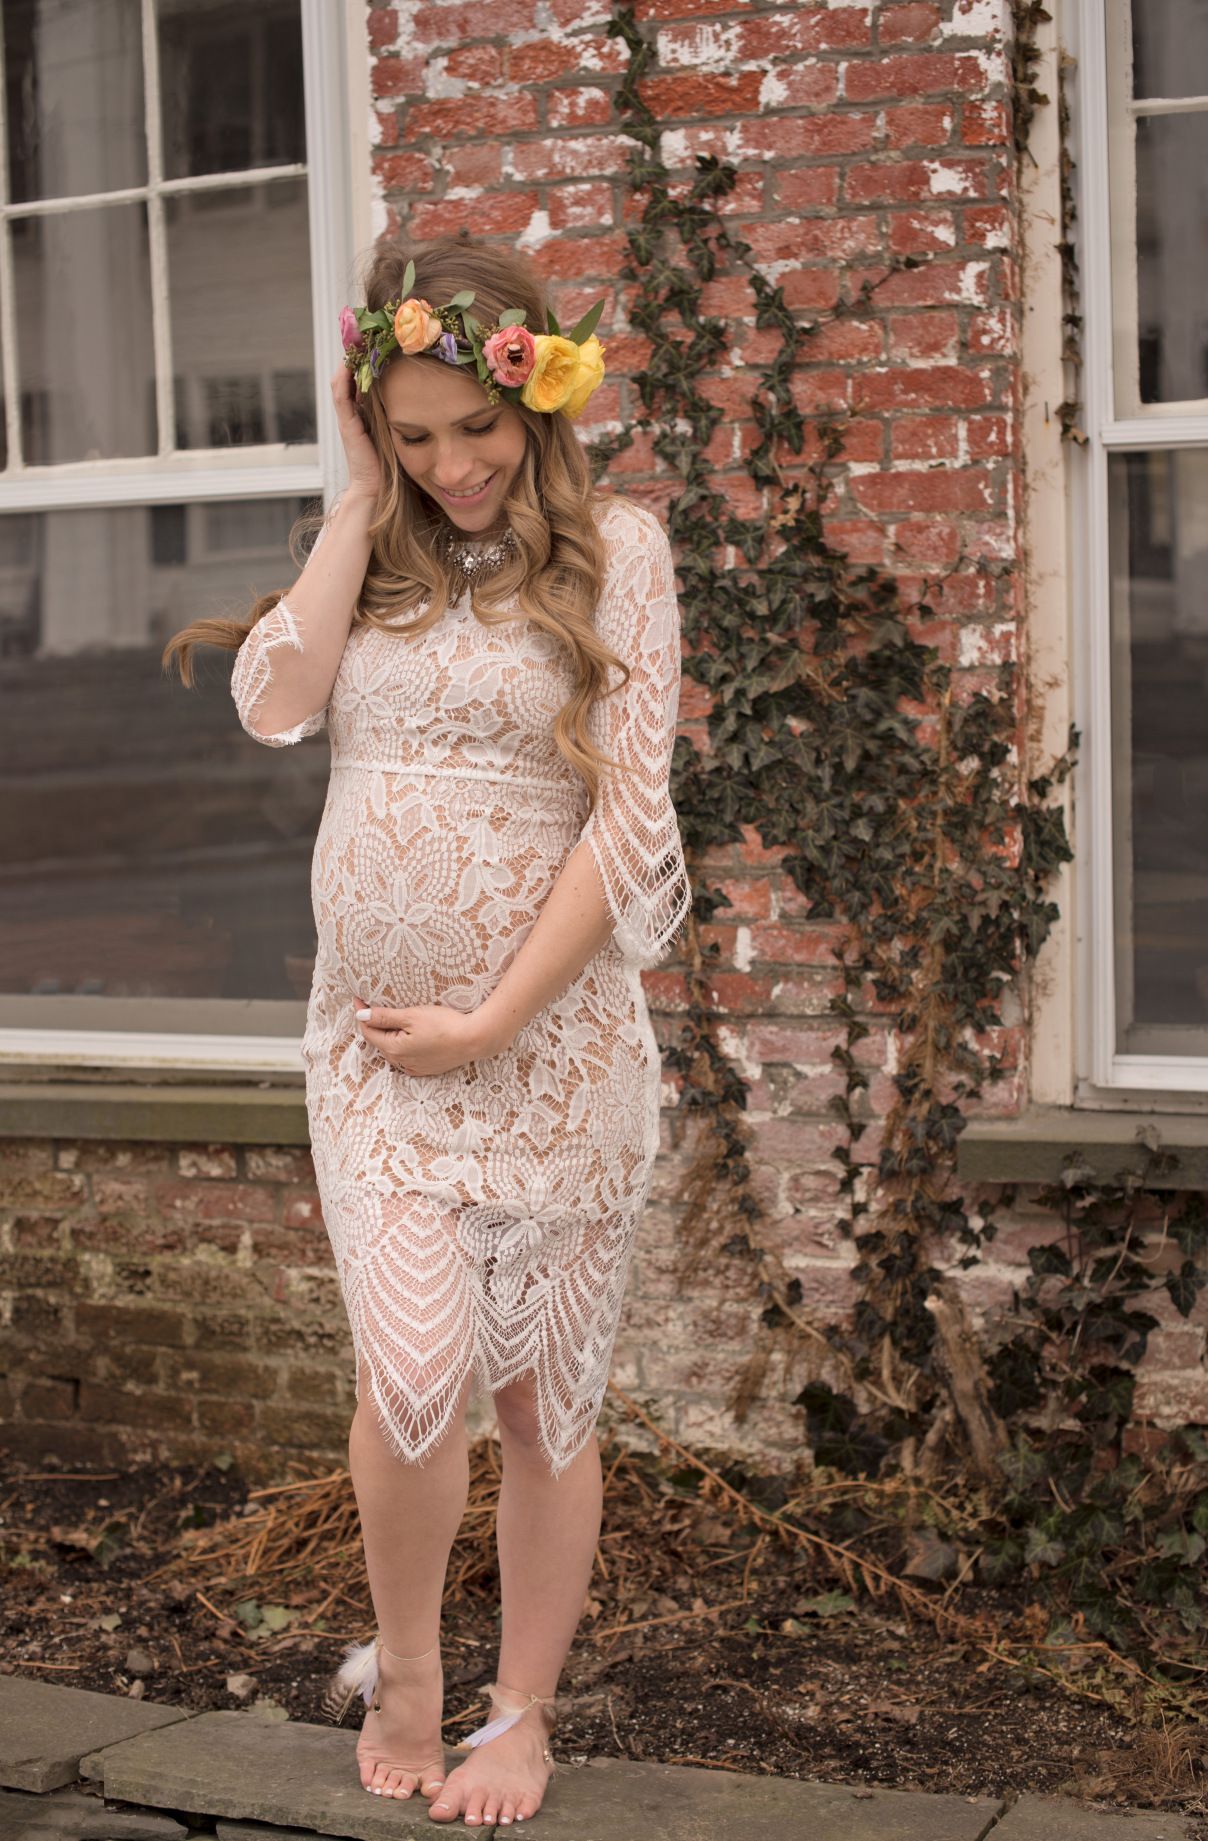 Full Size of Baby Shower:what To Wear To A Baby Shower In October Mom And Dad Baby Shower Outfits Petite Maternity Dresses For Baby Shower Maternity Blouses For Baby Shower Baby Shower Dresses Cute Inexpensive Maternity Clothes Maternity Evening Gowns Plus Size Maternity Dresses For Baby Shower